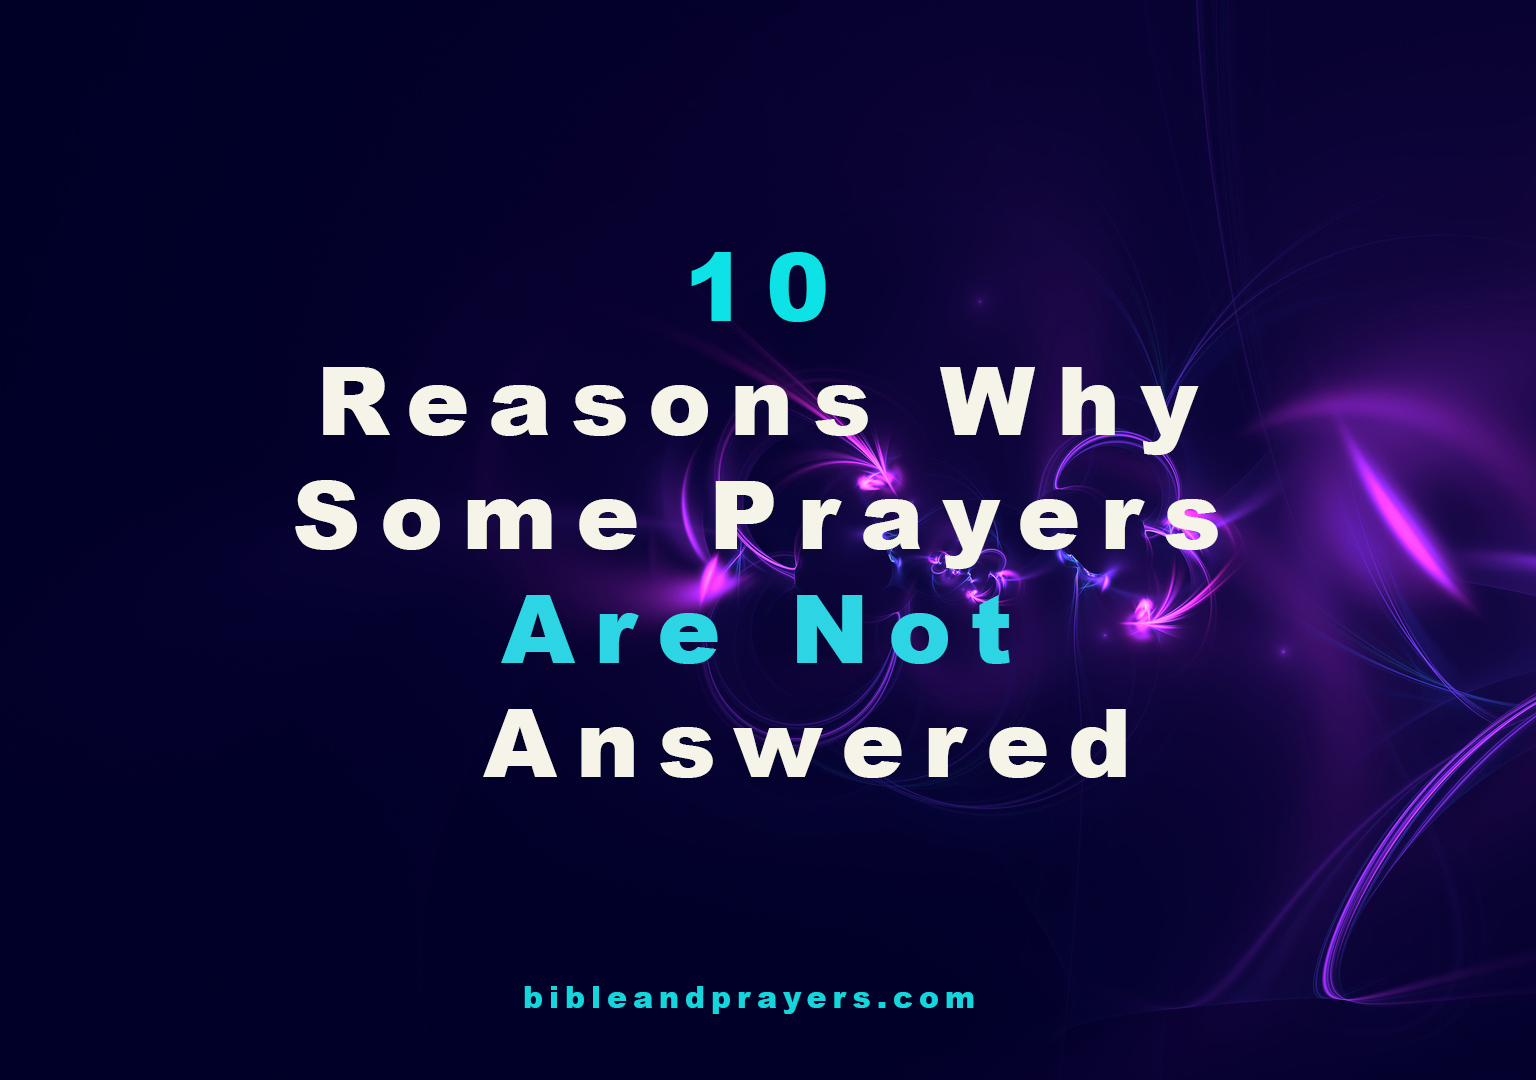 10 Reasons Why Some Prayers Are Not Answered